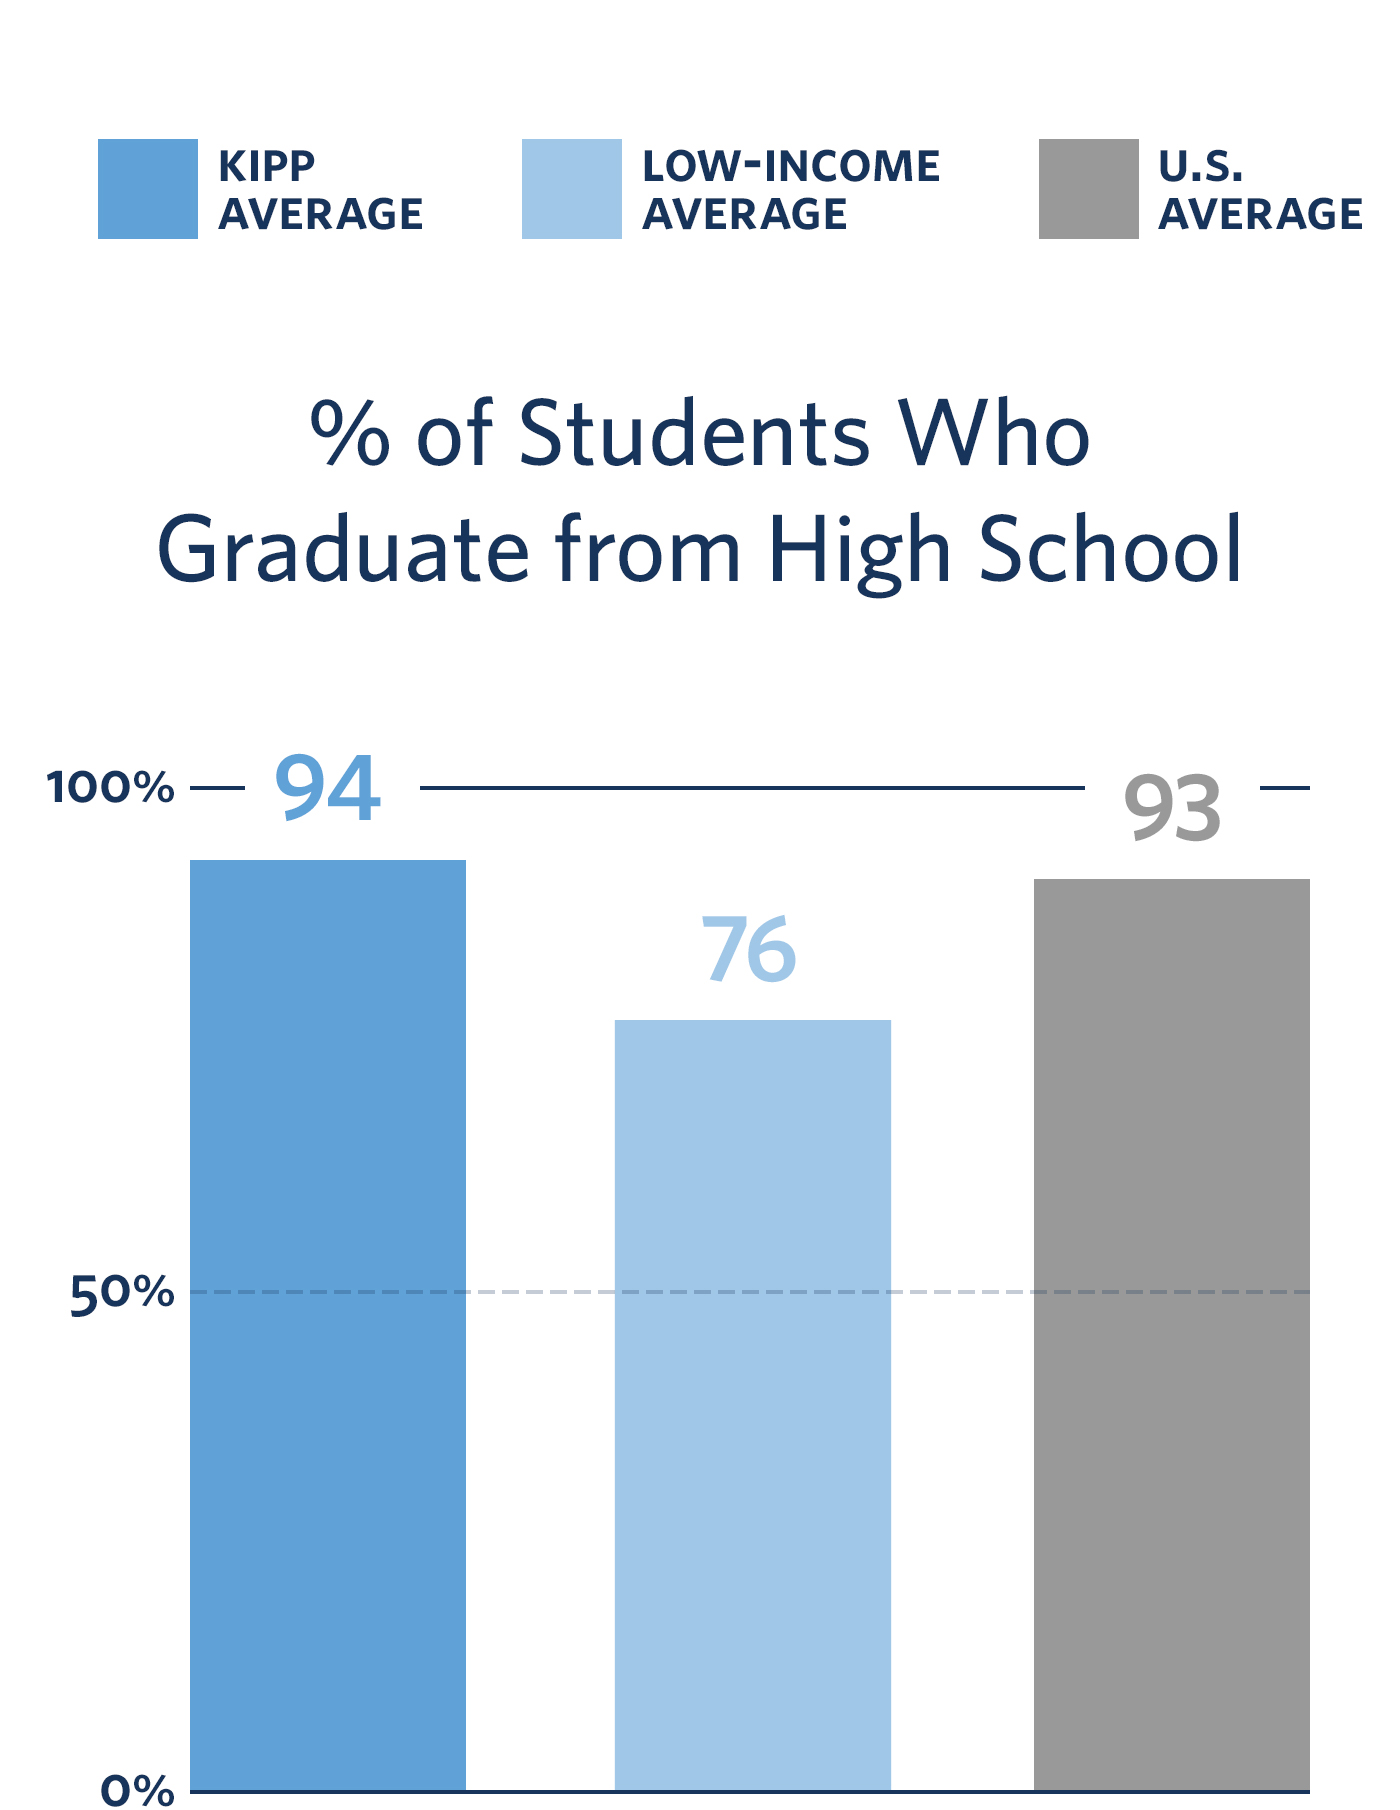 Percentage of Students Who Graduate from High School: 94% KIPP Average, 76% Low-Income Average, 93% U.S. Average